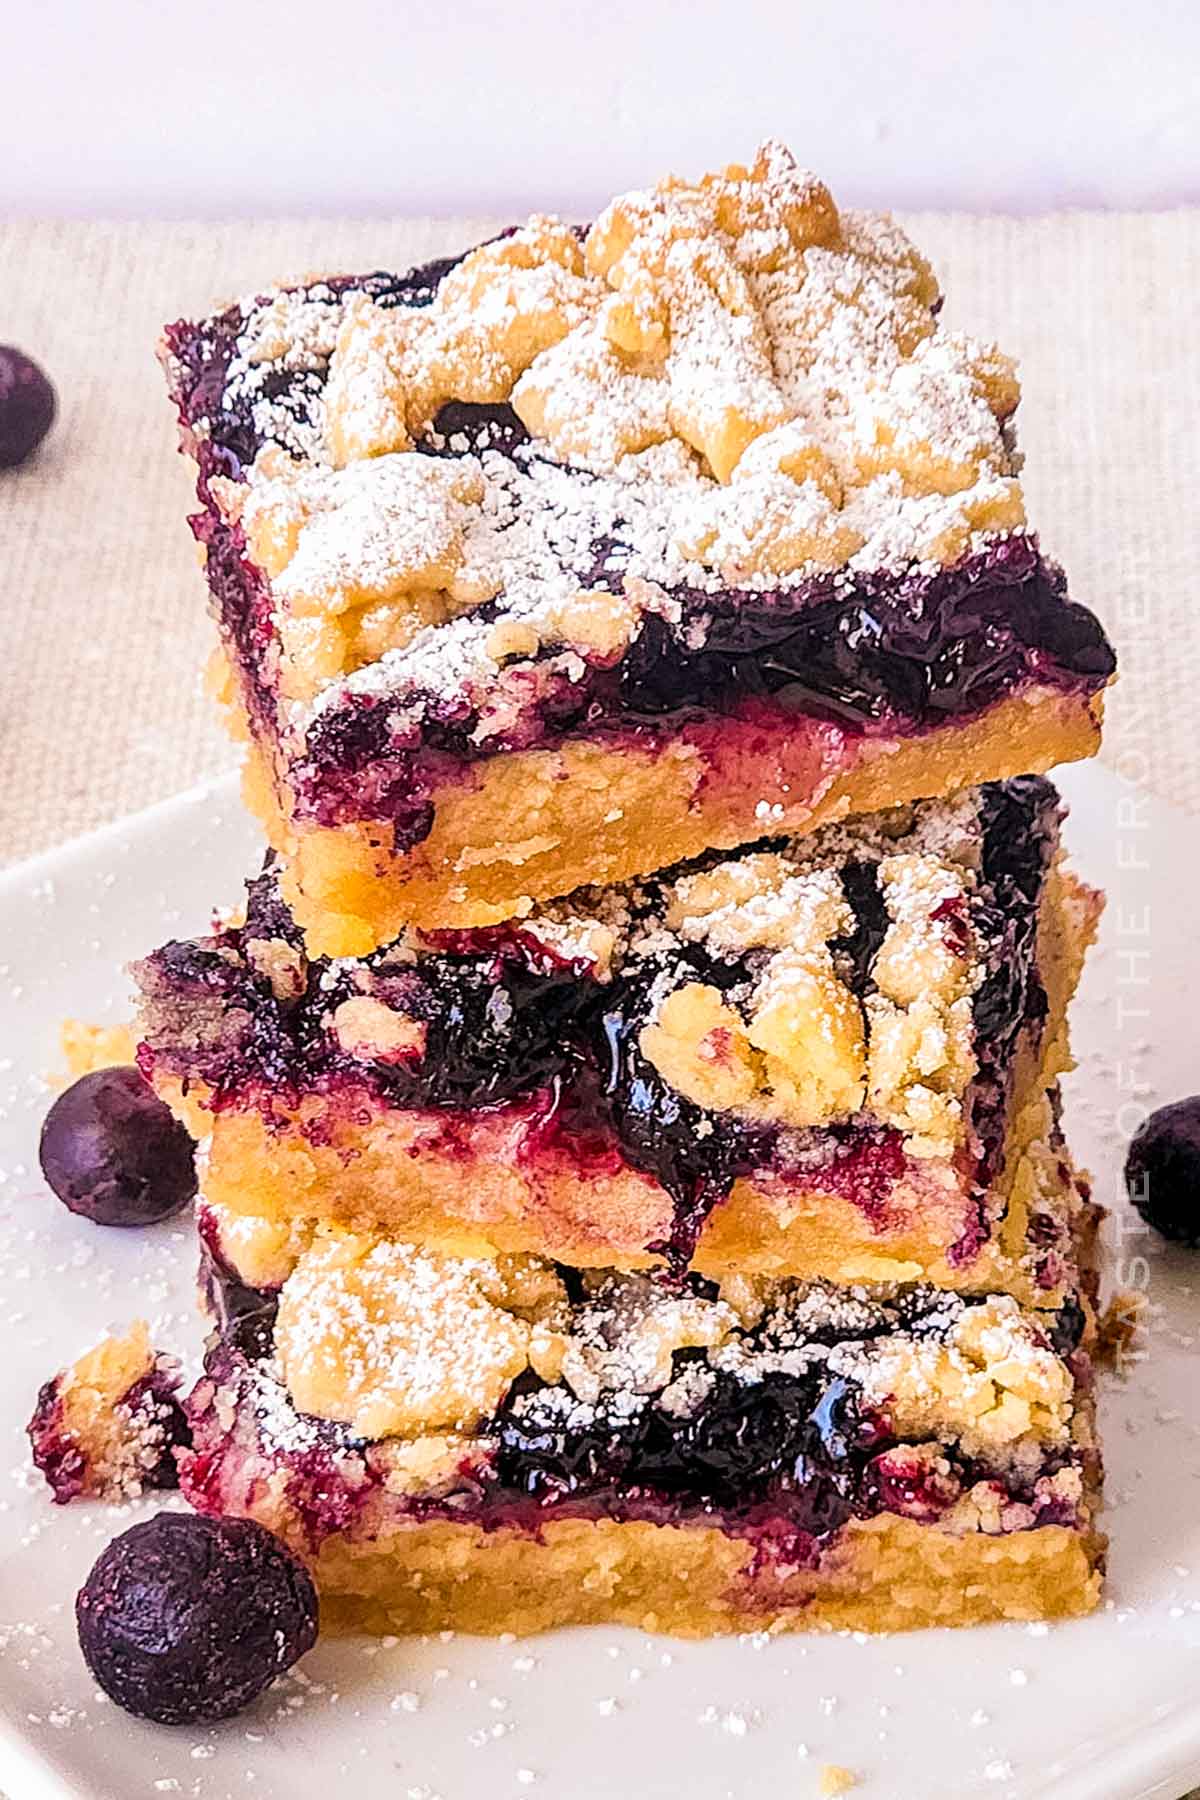 best bar recipe with blueberry filling